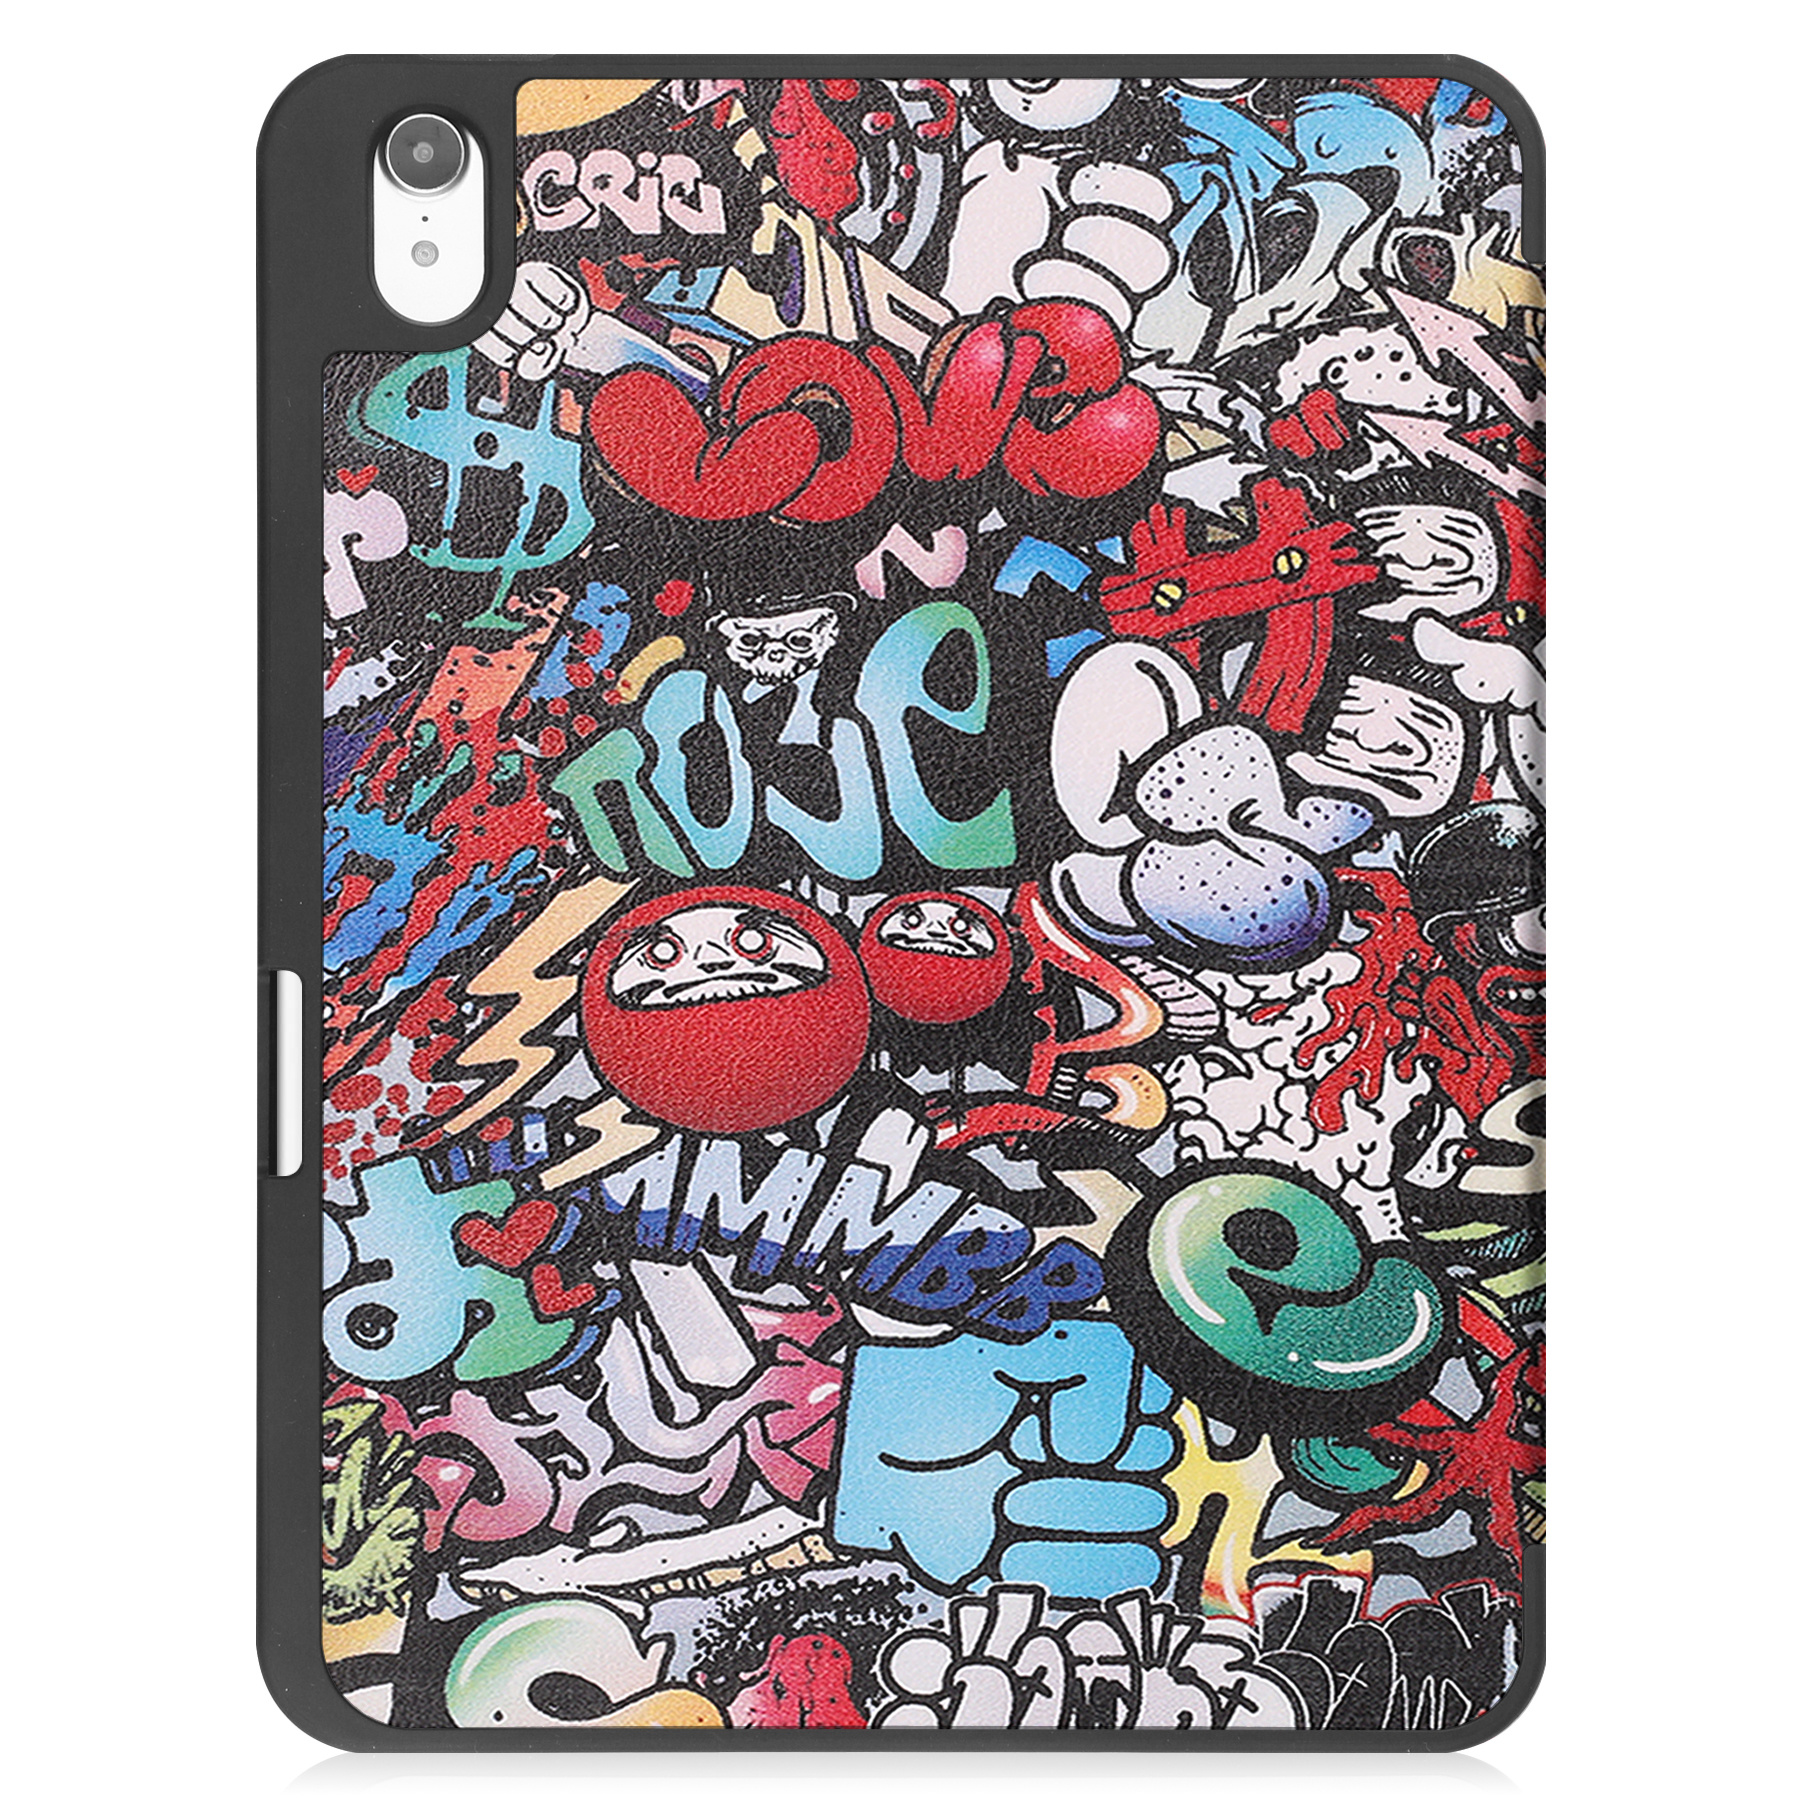 iPad 10 2022 Hoesje Hardcover Hoes Book Case Met Apple Pencil Uitsparing - Graffity